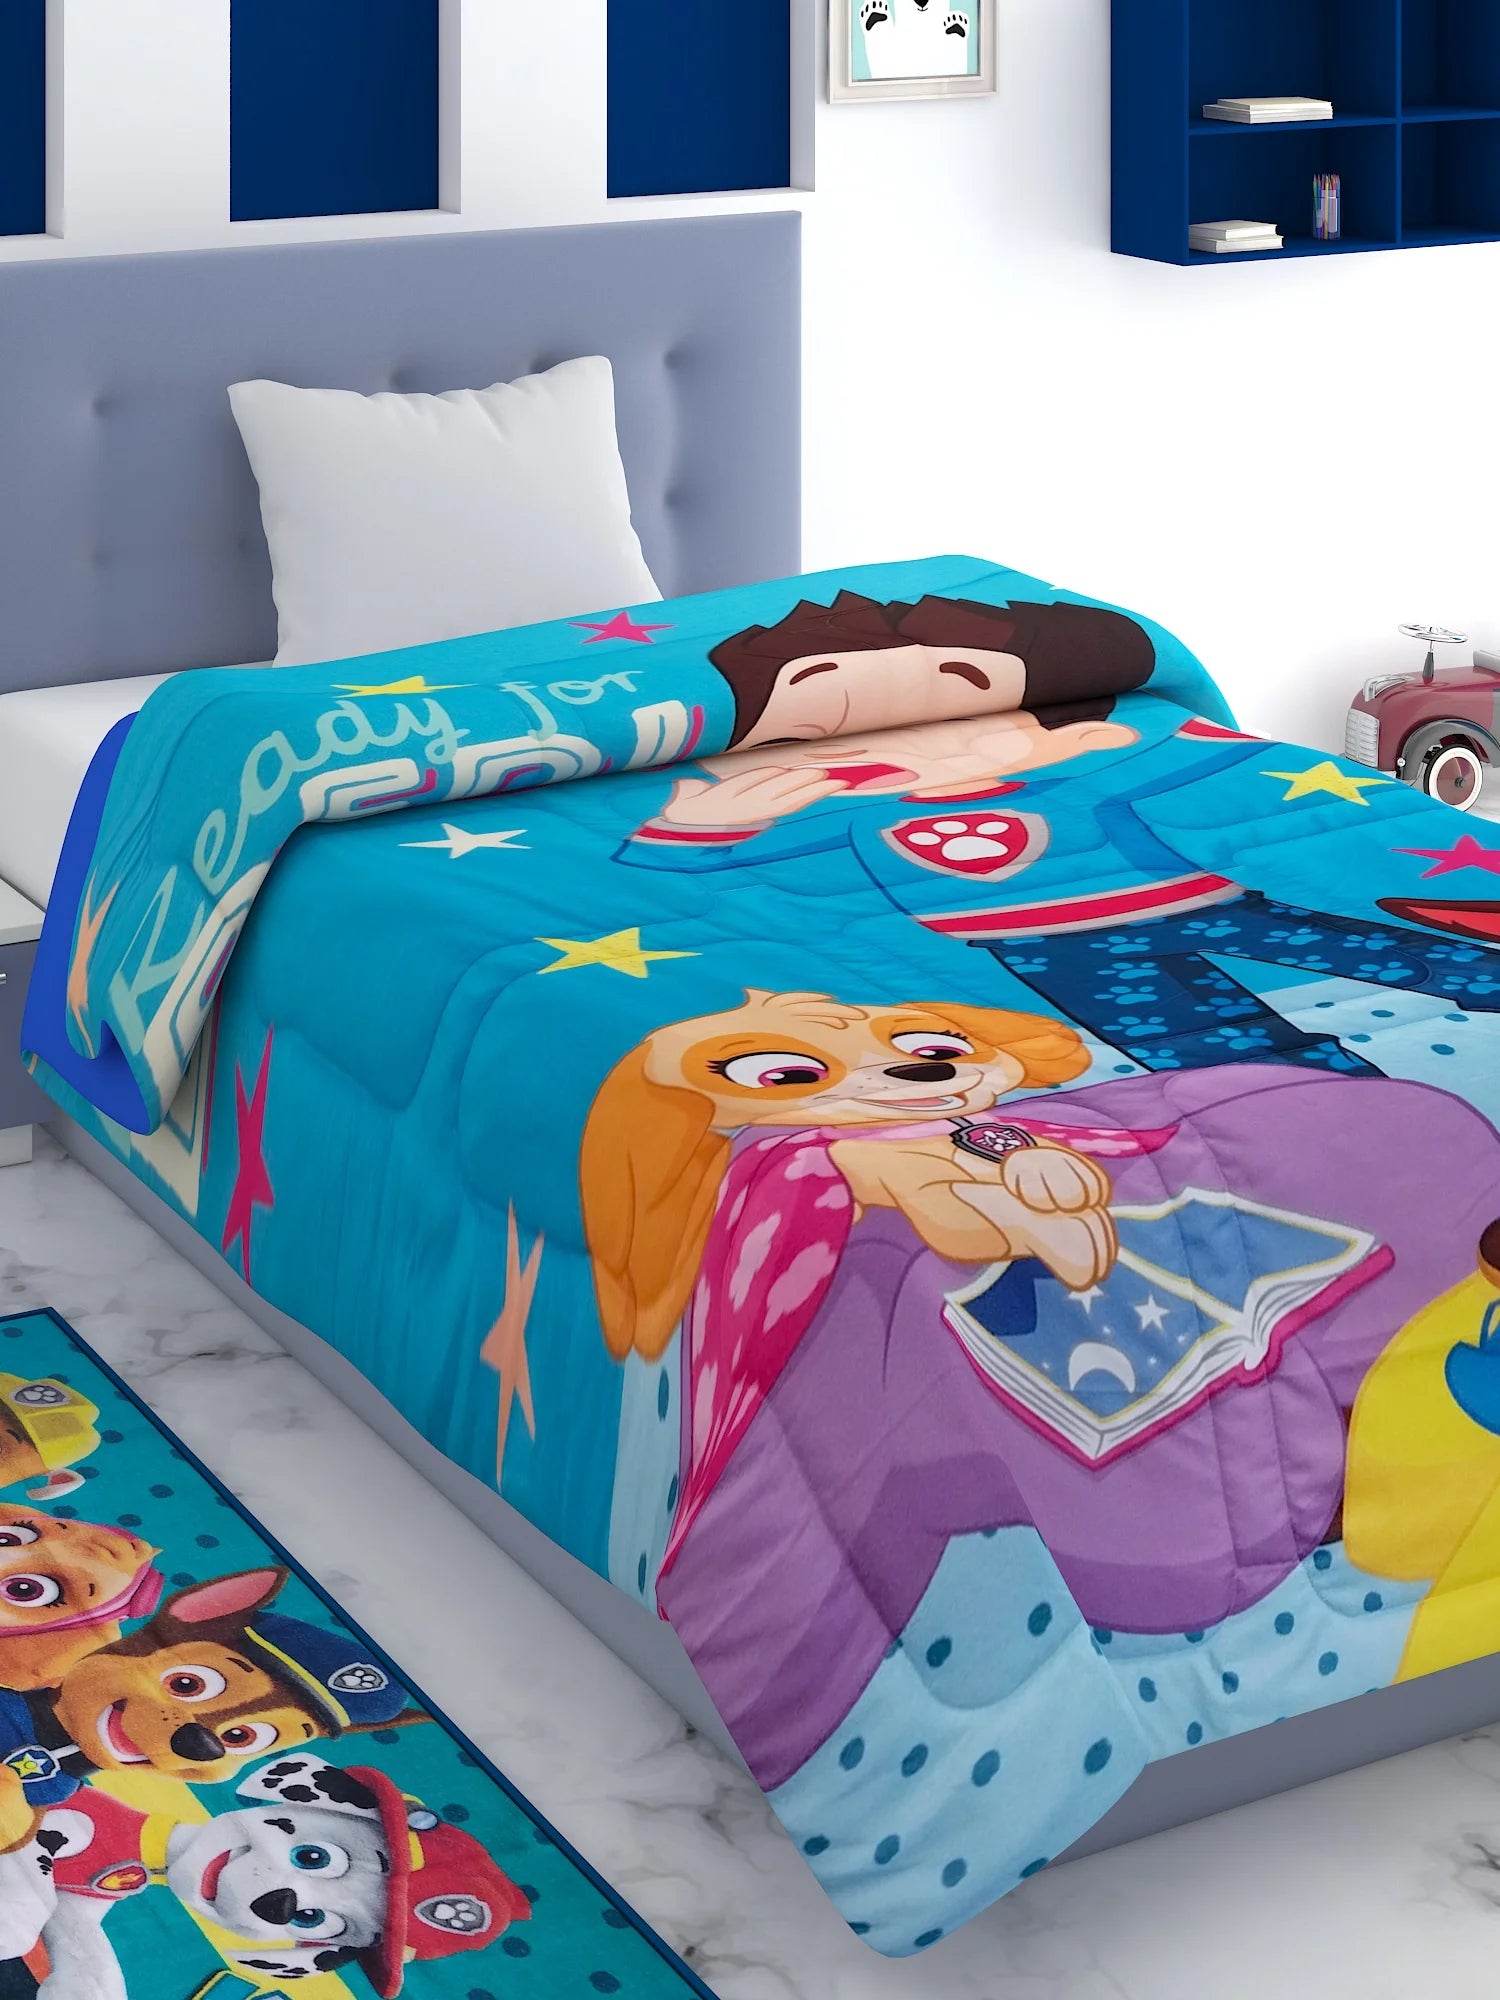 Paw Patrol Play Ready For Bed Kids Comforter 300 GSM 135x220 Cm